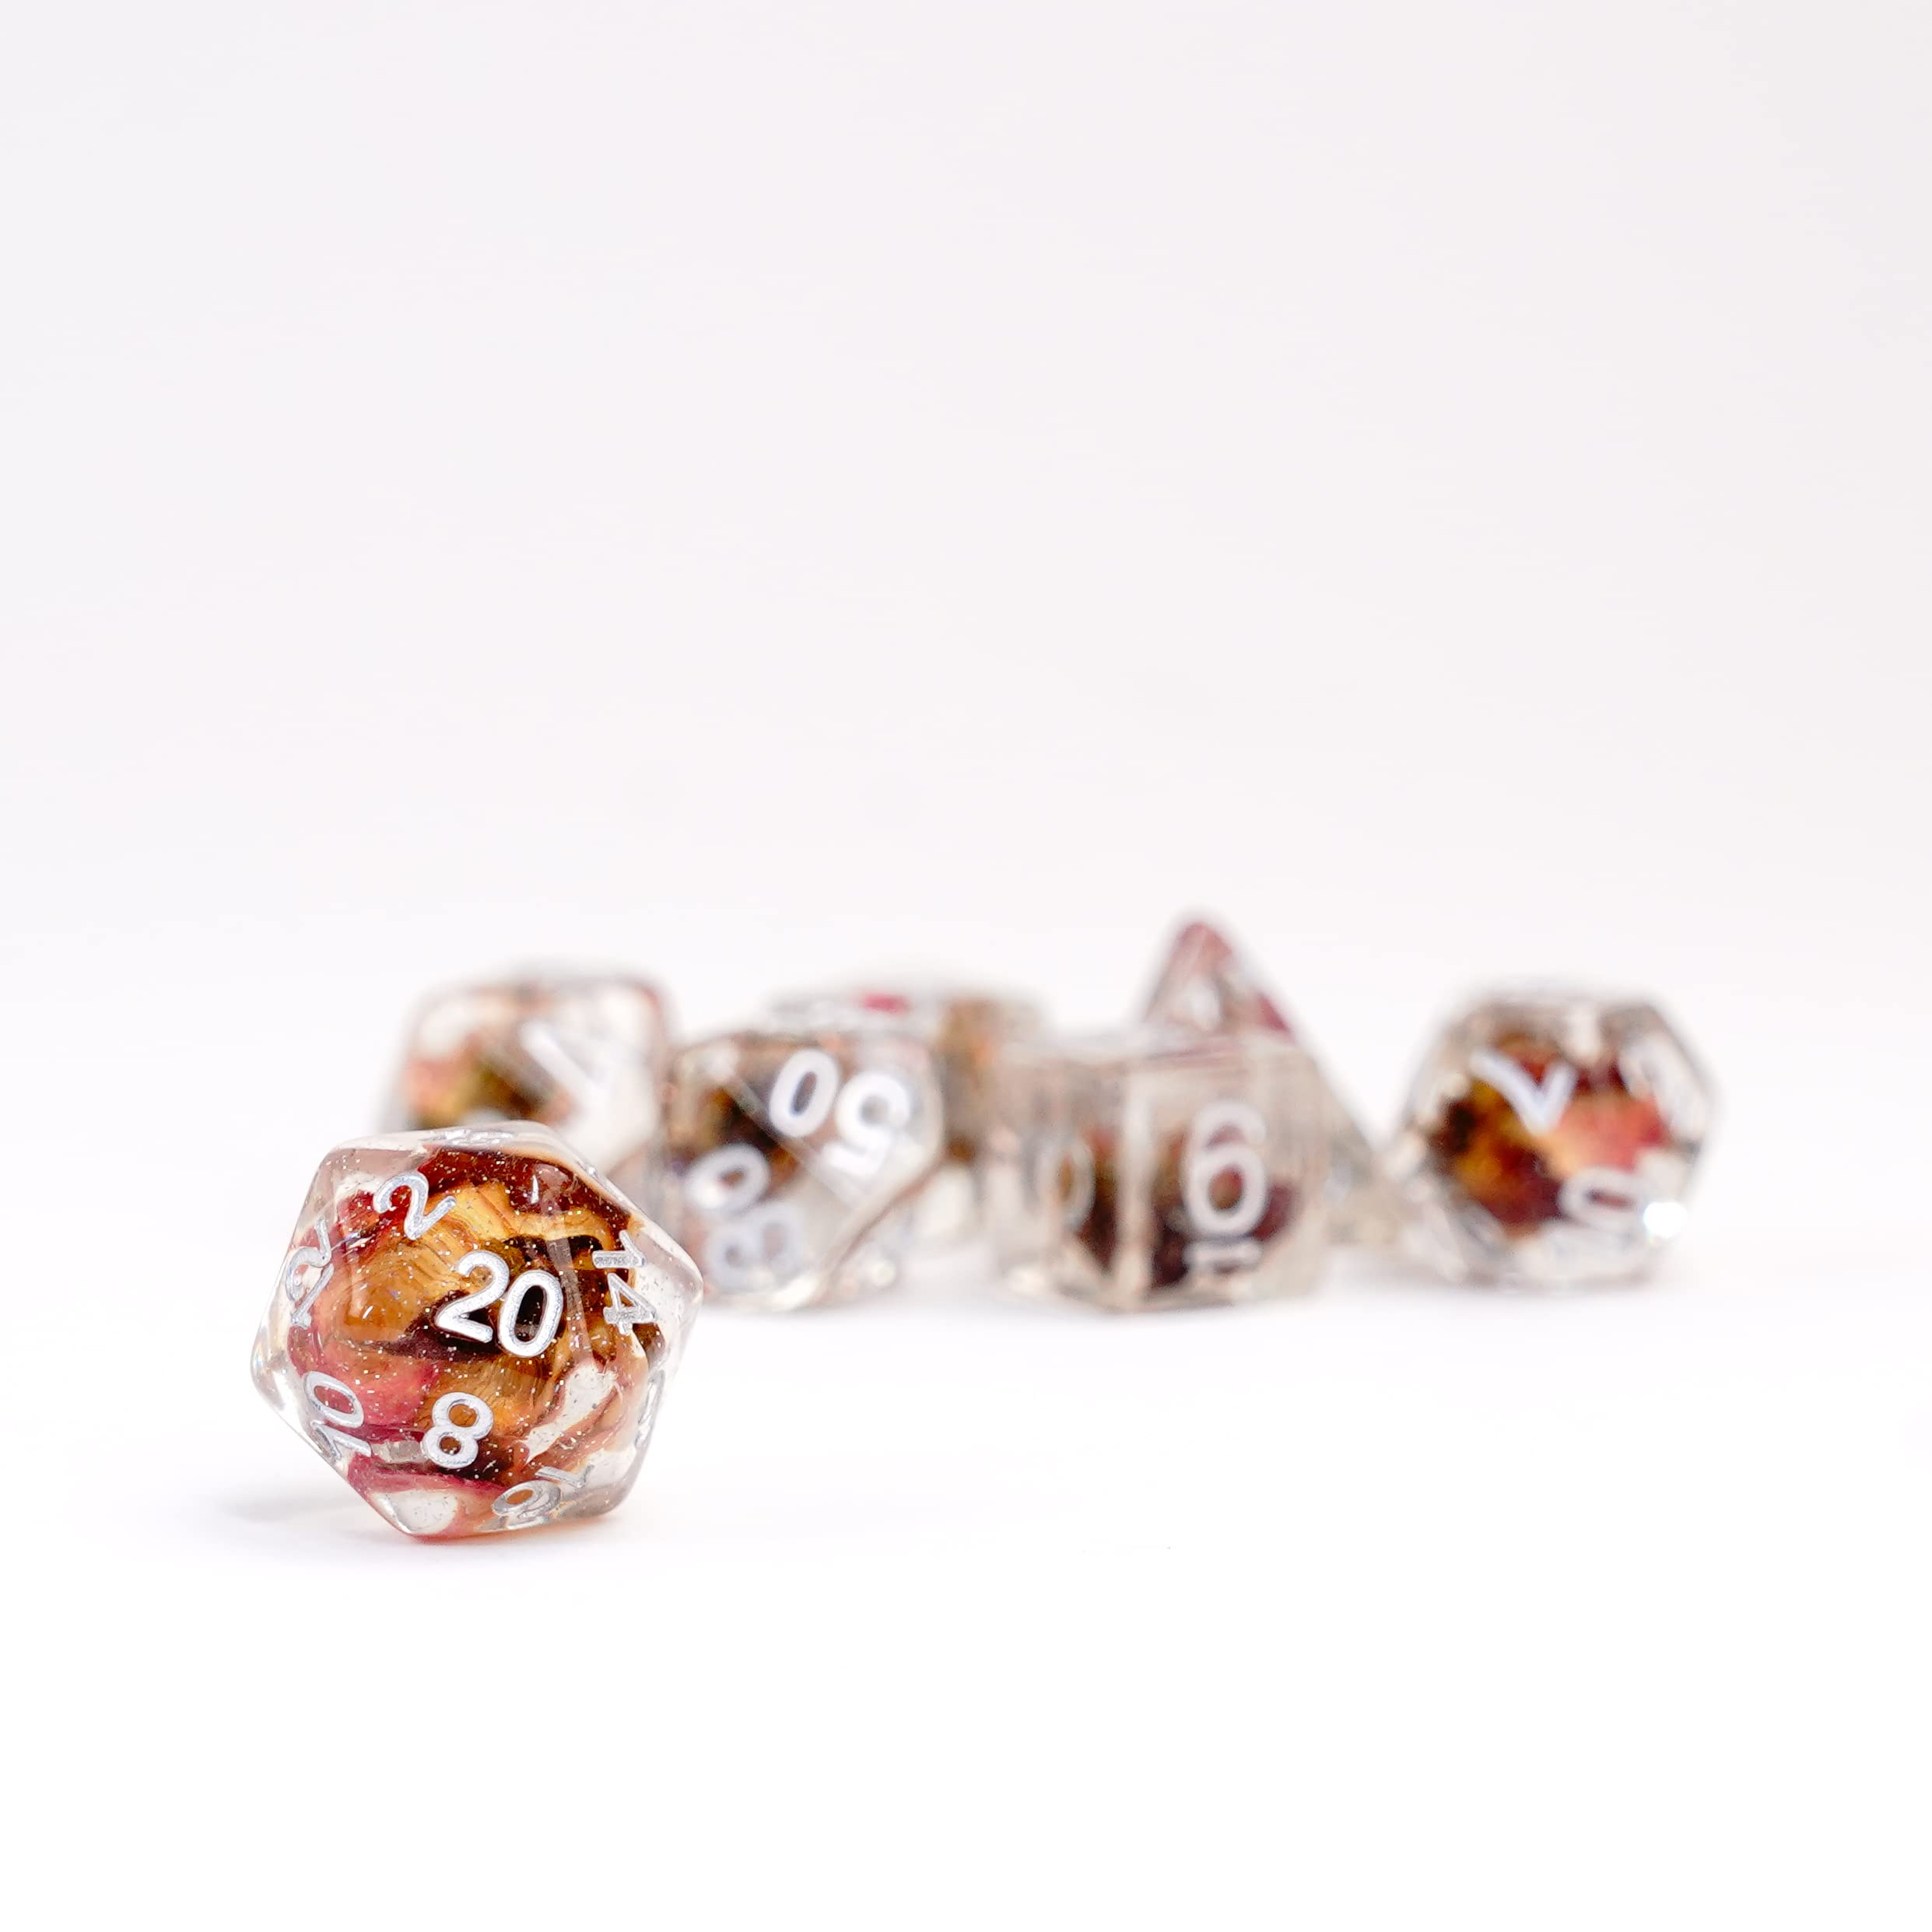 FanRoll by Metallic Dice Games 16mm Resin Poly DND Dice Set: Rose Dice, Role Playing Game Dice for Dungeons and Dragons